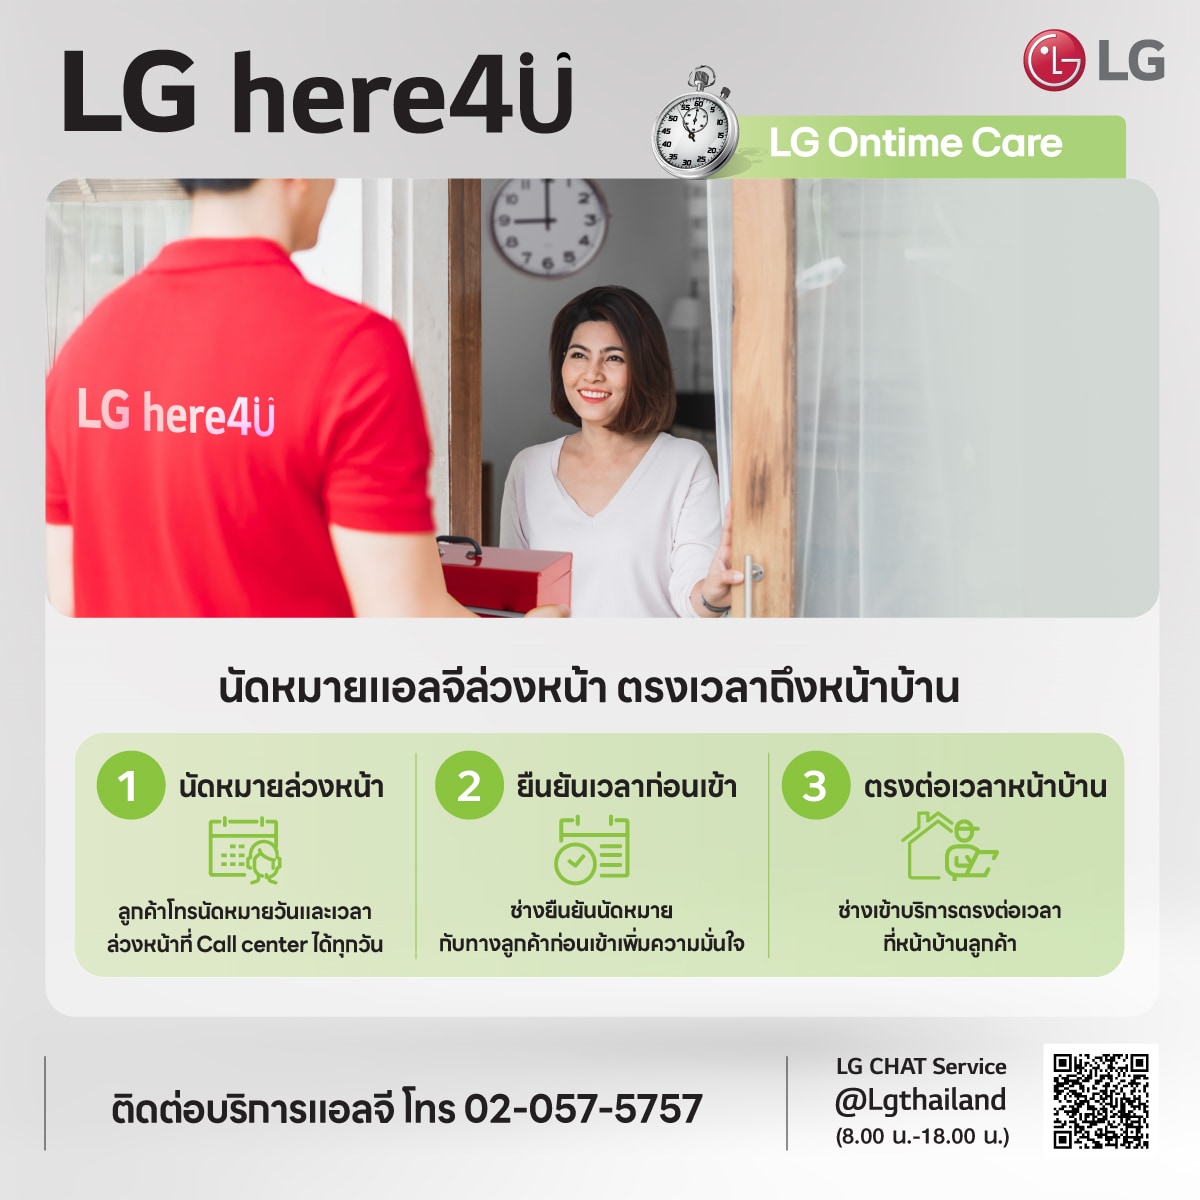 LG Ontime Care